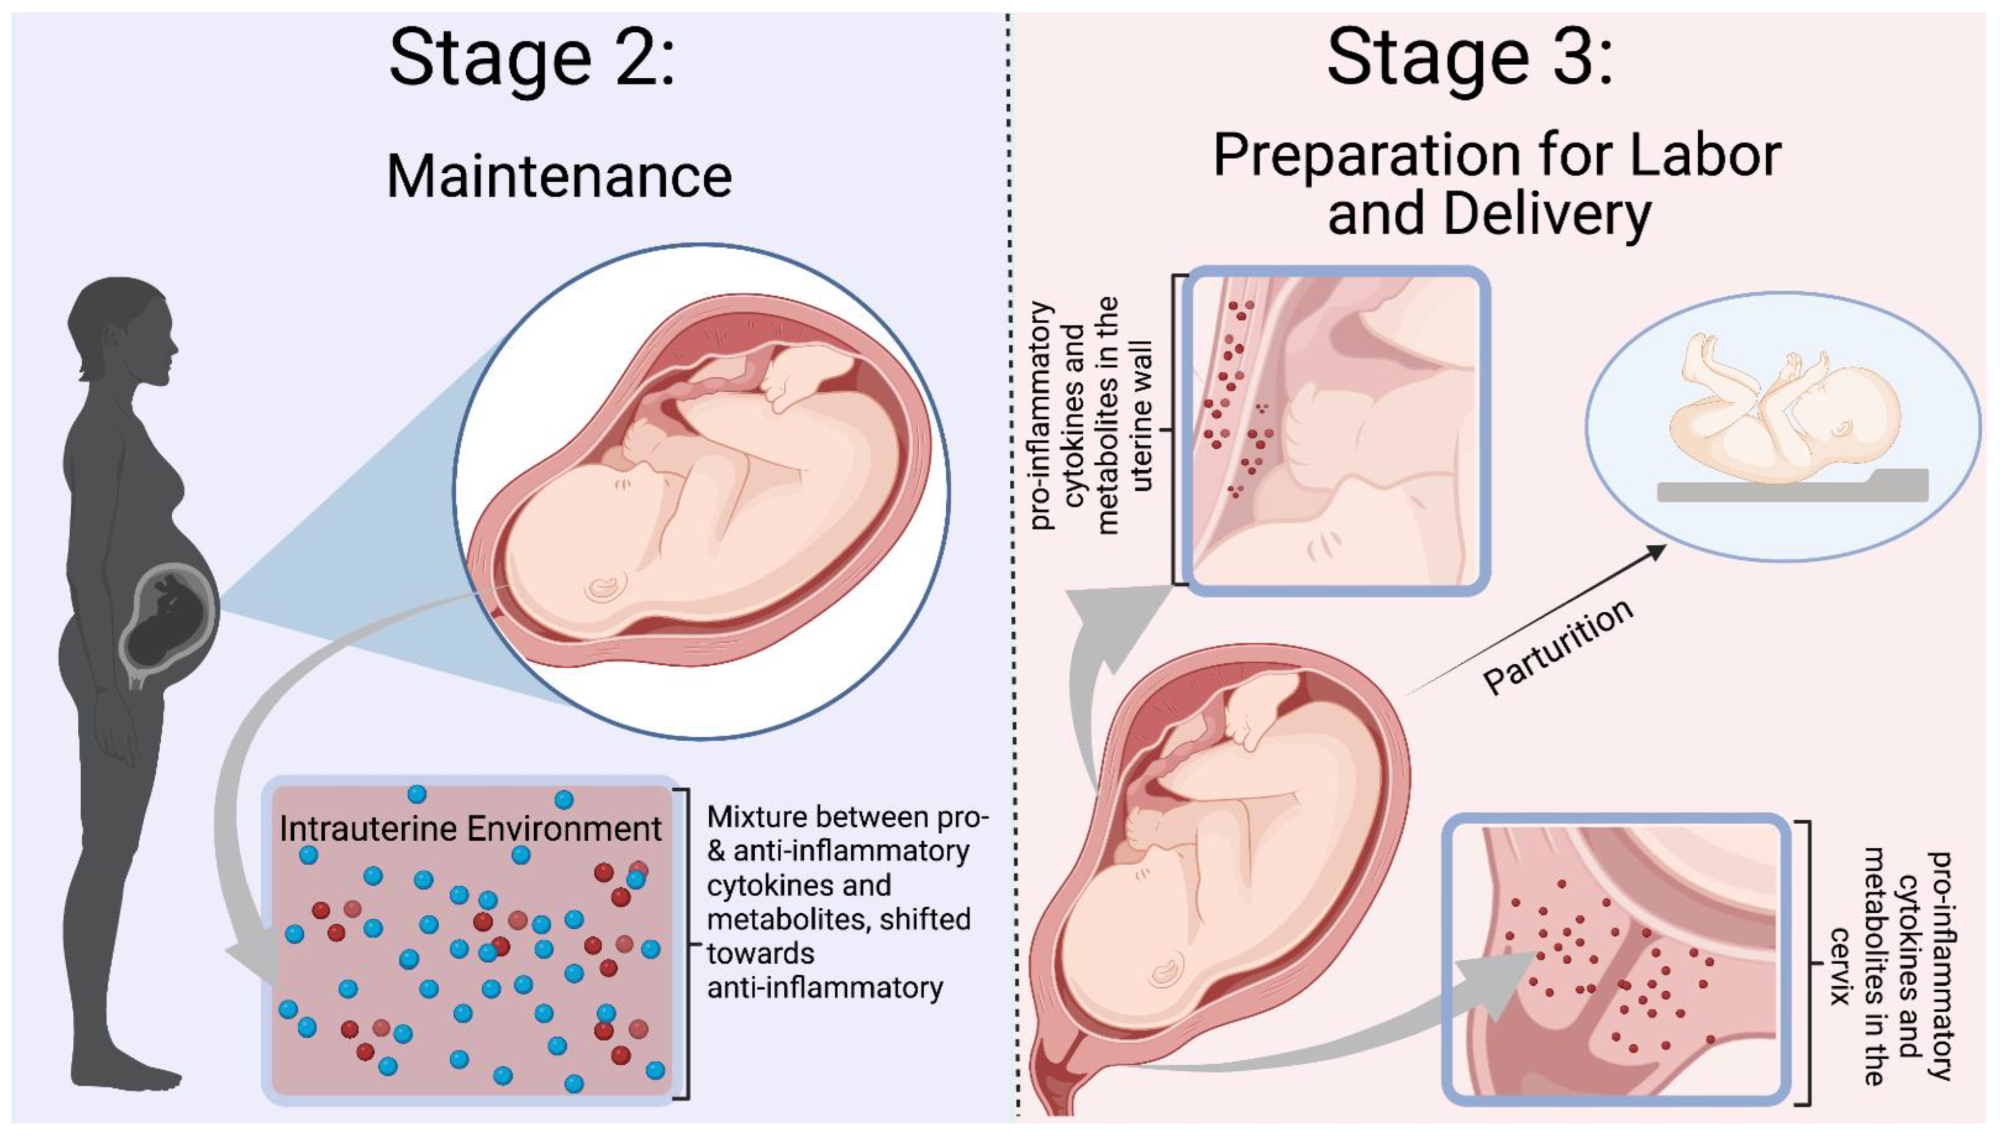 Mor et al. Stages 2–3 of Immunological Events Occurring During Pregnancy. Stage 2 is defined by a balance between pro- and anti-inflammatory mediators, with a shift towards an anti-inflammatory environment. Inflammation is needed to prevent infection and rejection of the fetus. Stage 3 is a pro-inflammatory state with preparation for labor and delivery. Cytokines and mediators remodel the cervix and infiltrate the uterus to participate in uterine contractions. The blue dots represent anti-inflammatory molecules, and the red dots represent pro-inflammatory molecules. The figure was created in Biorender.